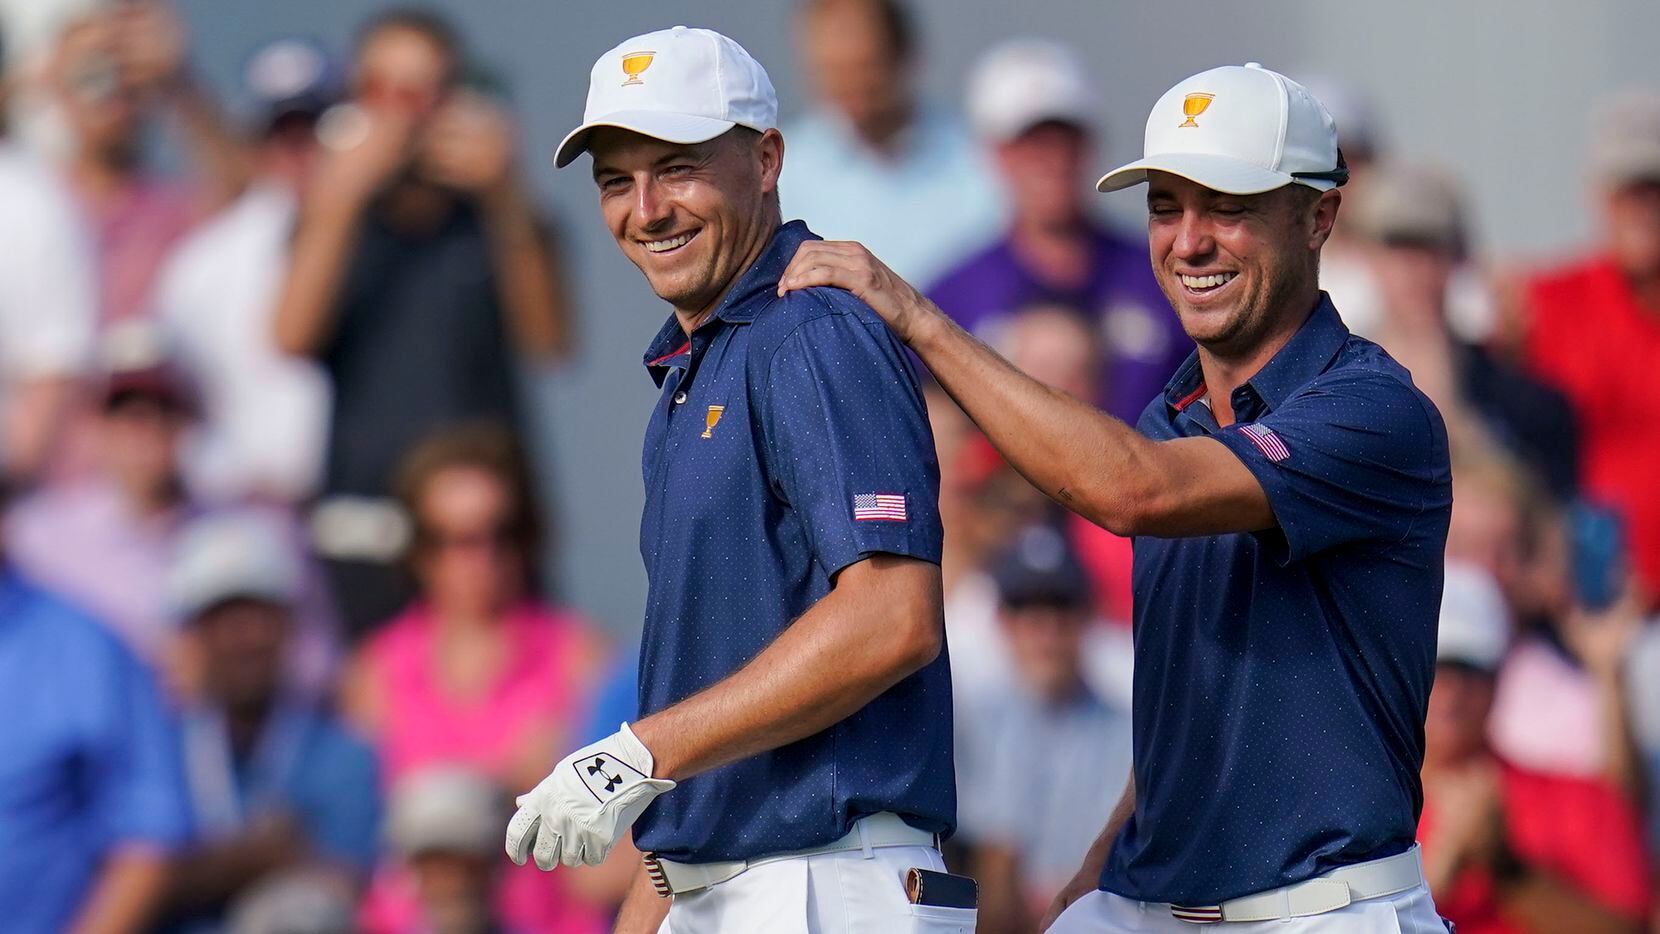 Power duo of Jordan Spieth, Justin Thomas moves Americans closer to